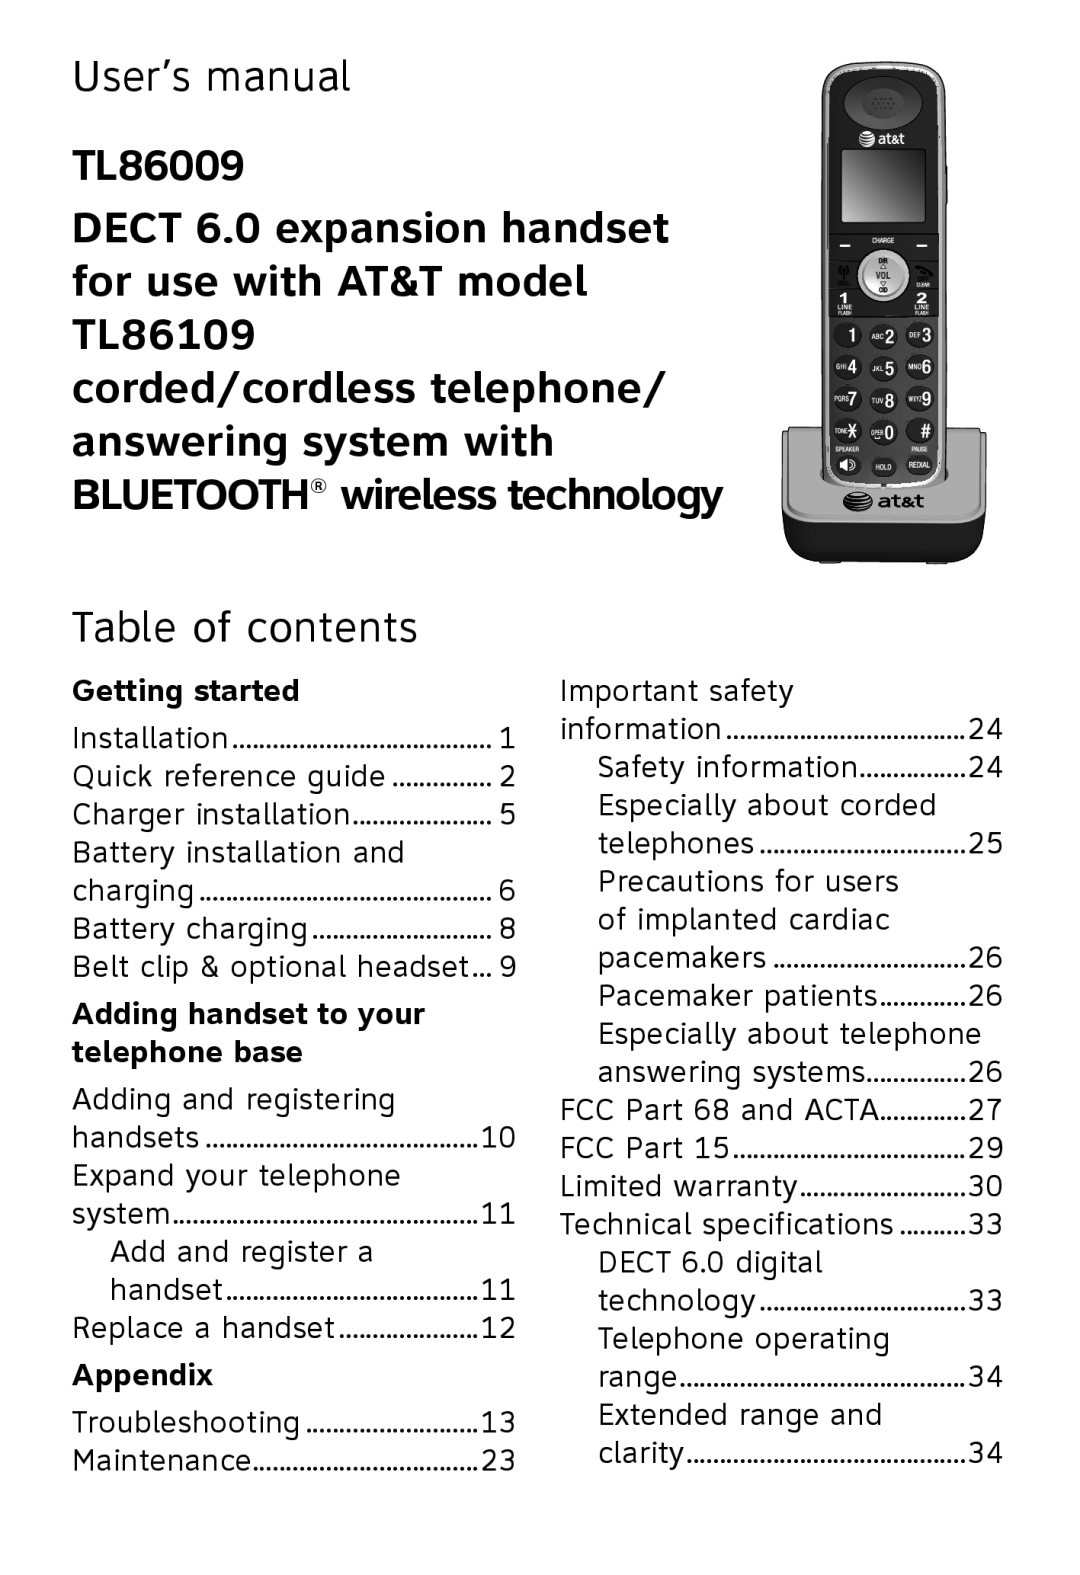 AT&T TL86009, TL86109 User’s manual, Table of contents, Getting started, Adding handset to your, telephone base, Appendix 